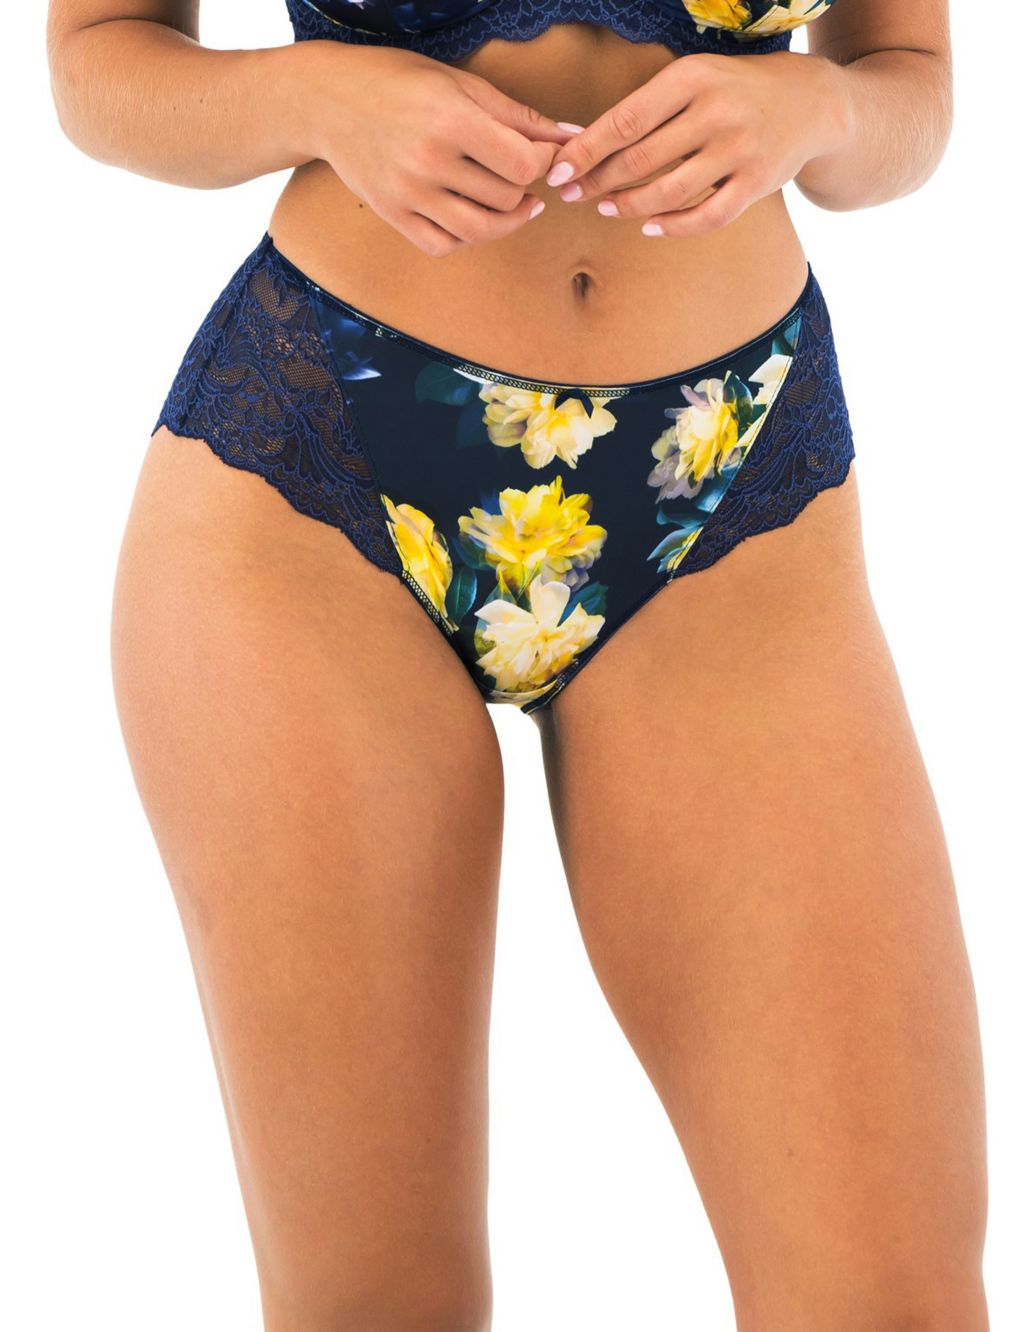 Lucia Lace Floral Knicker Shorts image 3